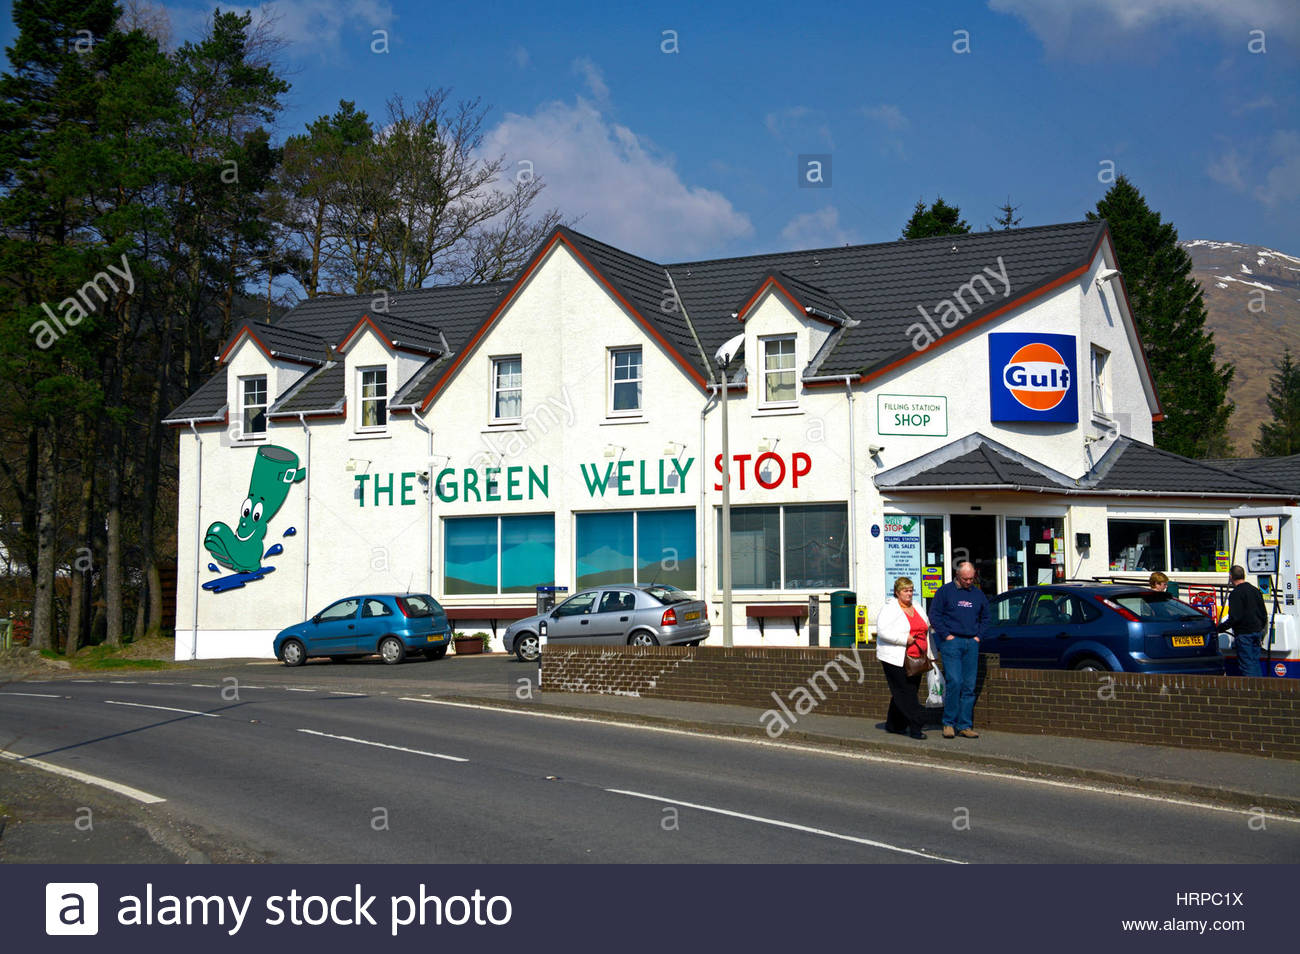 The Green Welly Stop, Tyndrum Scotland Stock Photo